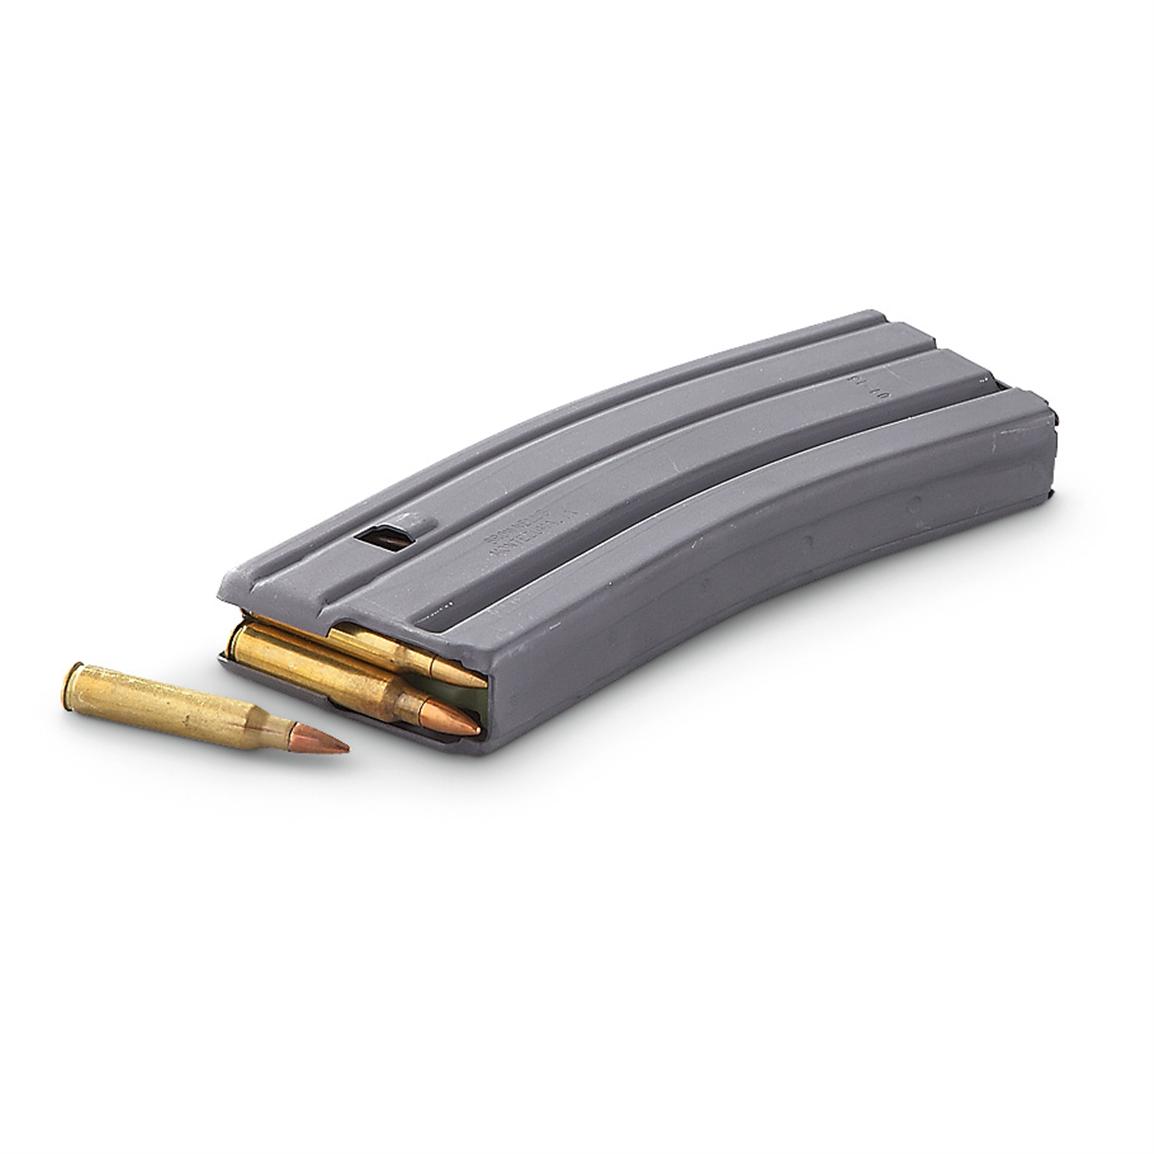 Brownells Ar 15 M16 Military Spec Magazine 30 Rounds 124775 Rifle